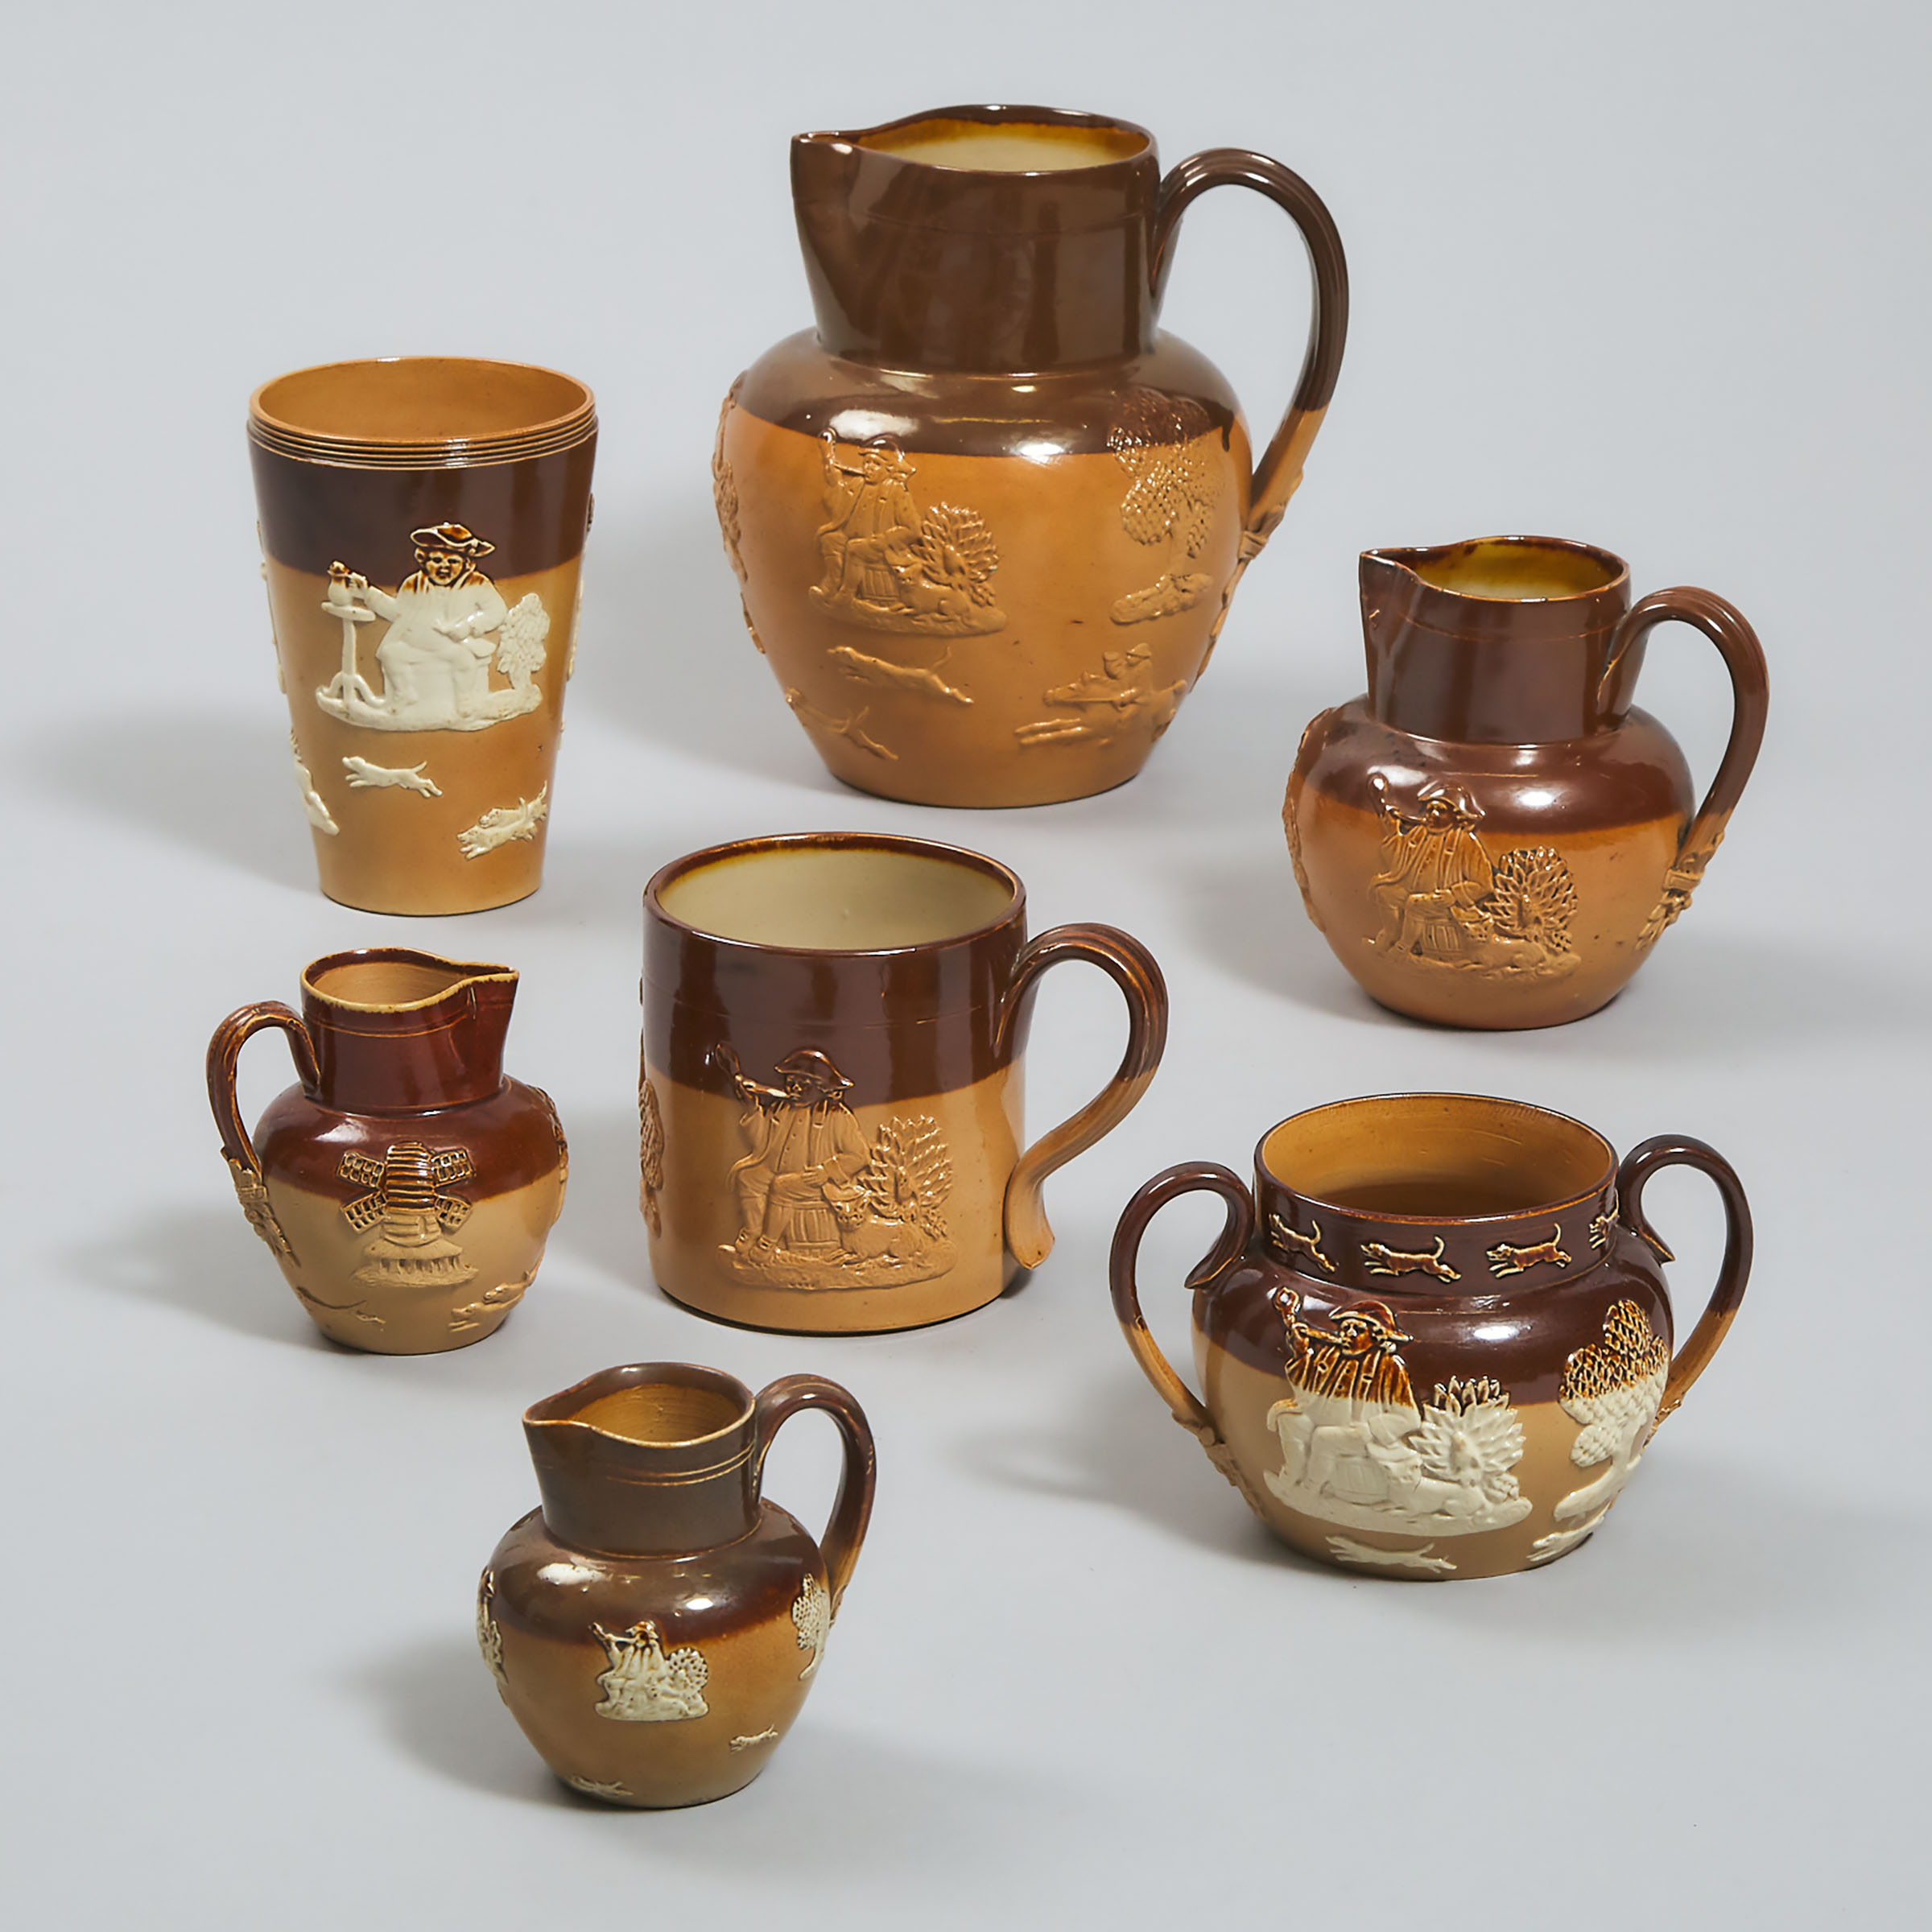 Group of Doulton Lambeth Sprigged Stoneware, late 19th century